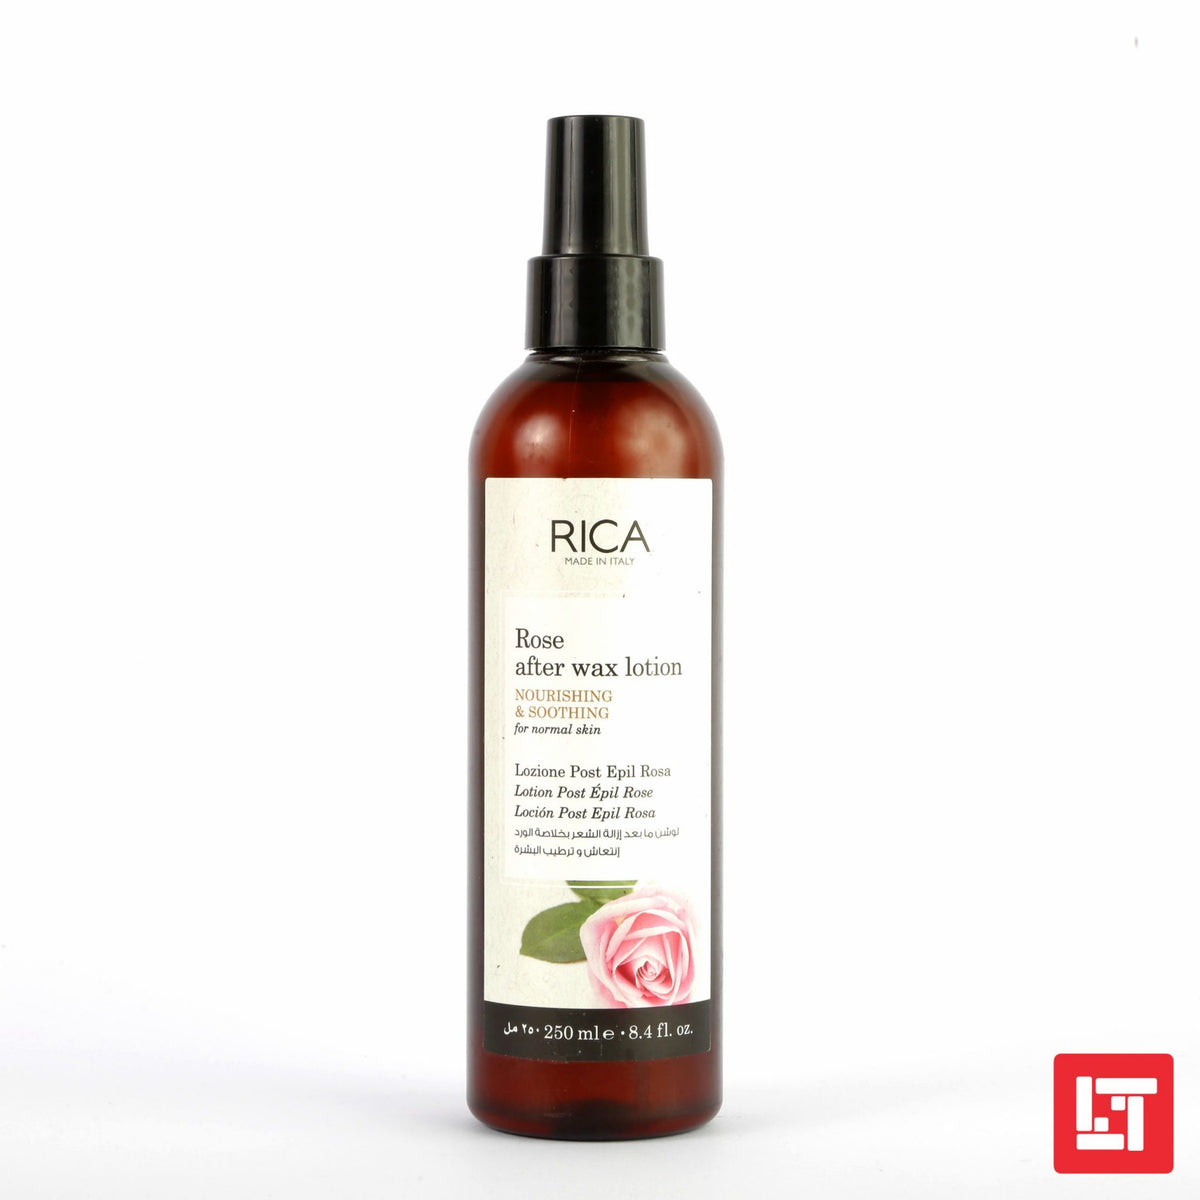 RICA Rose after Wax Lotion Nourishing &amp; Soothing for Normal Skin 250ml freeshipping - lasertag.pk